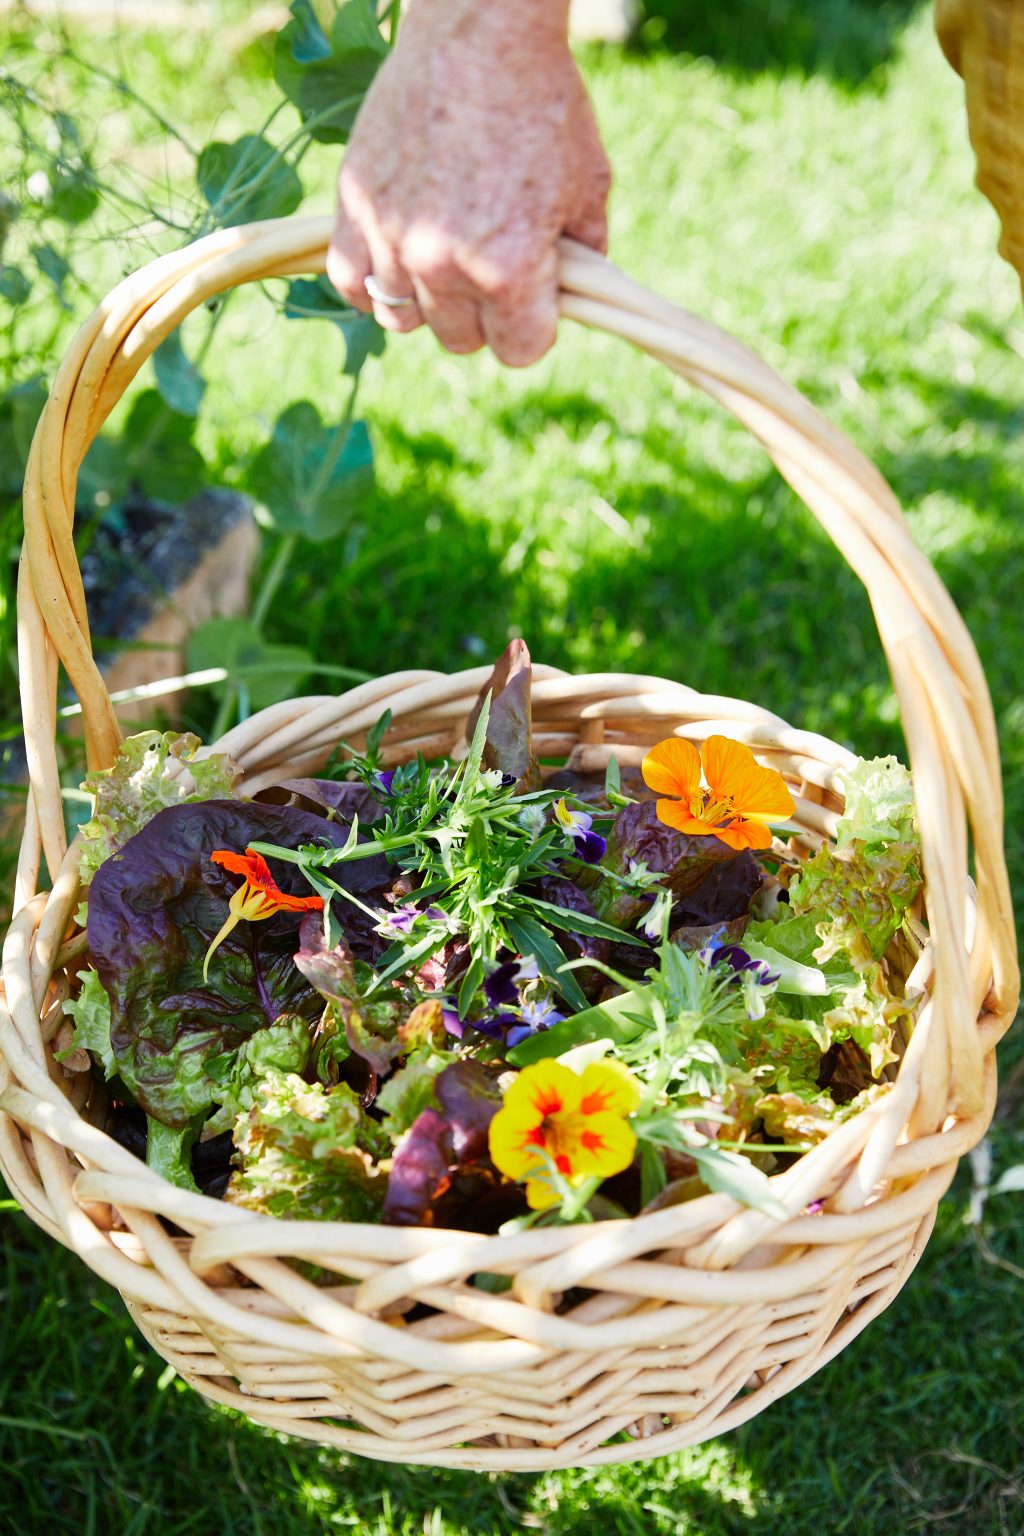 image of a hand holding a basket of garden greens